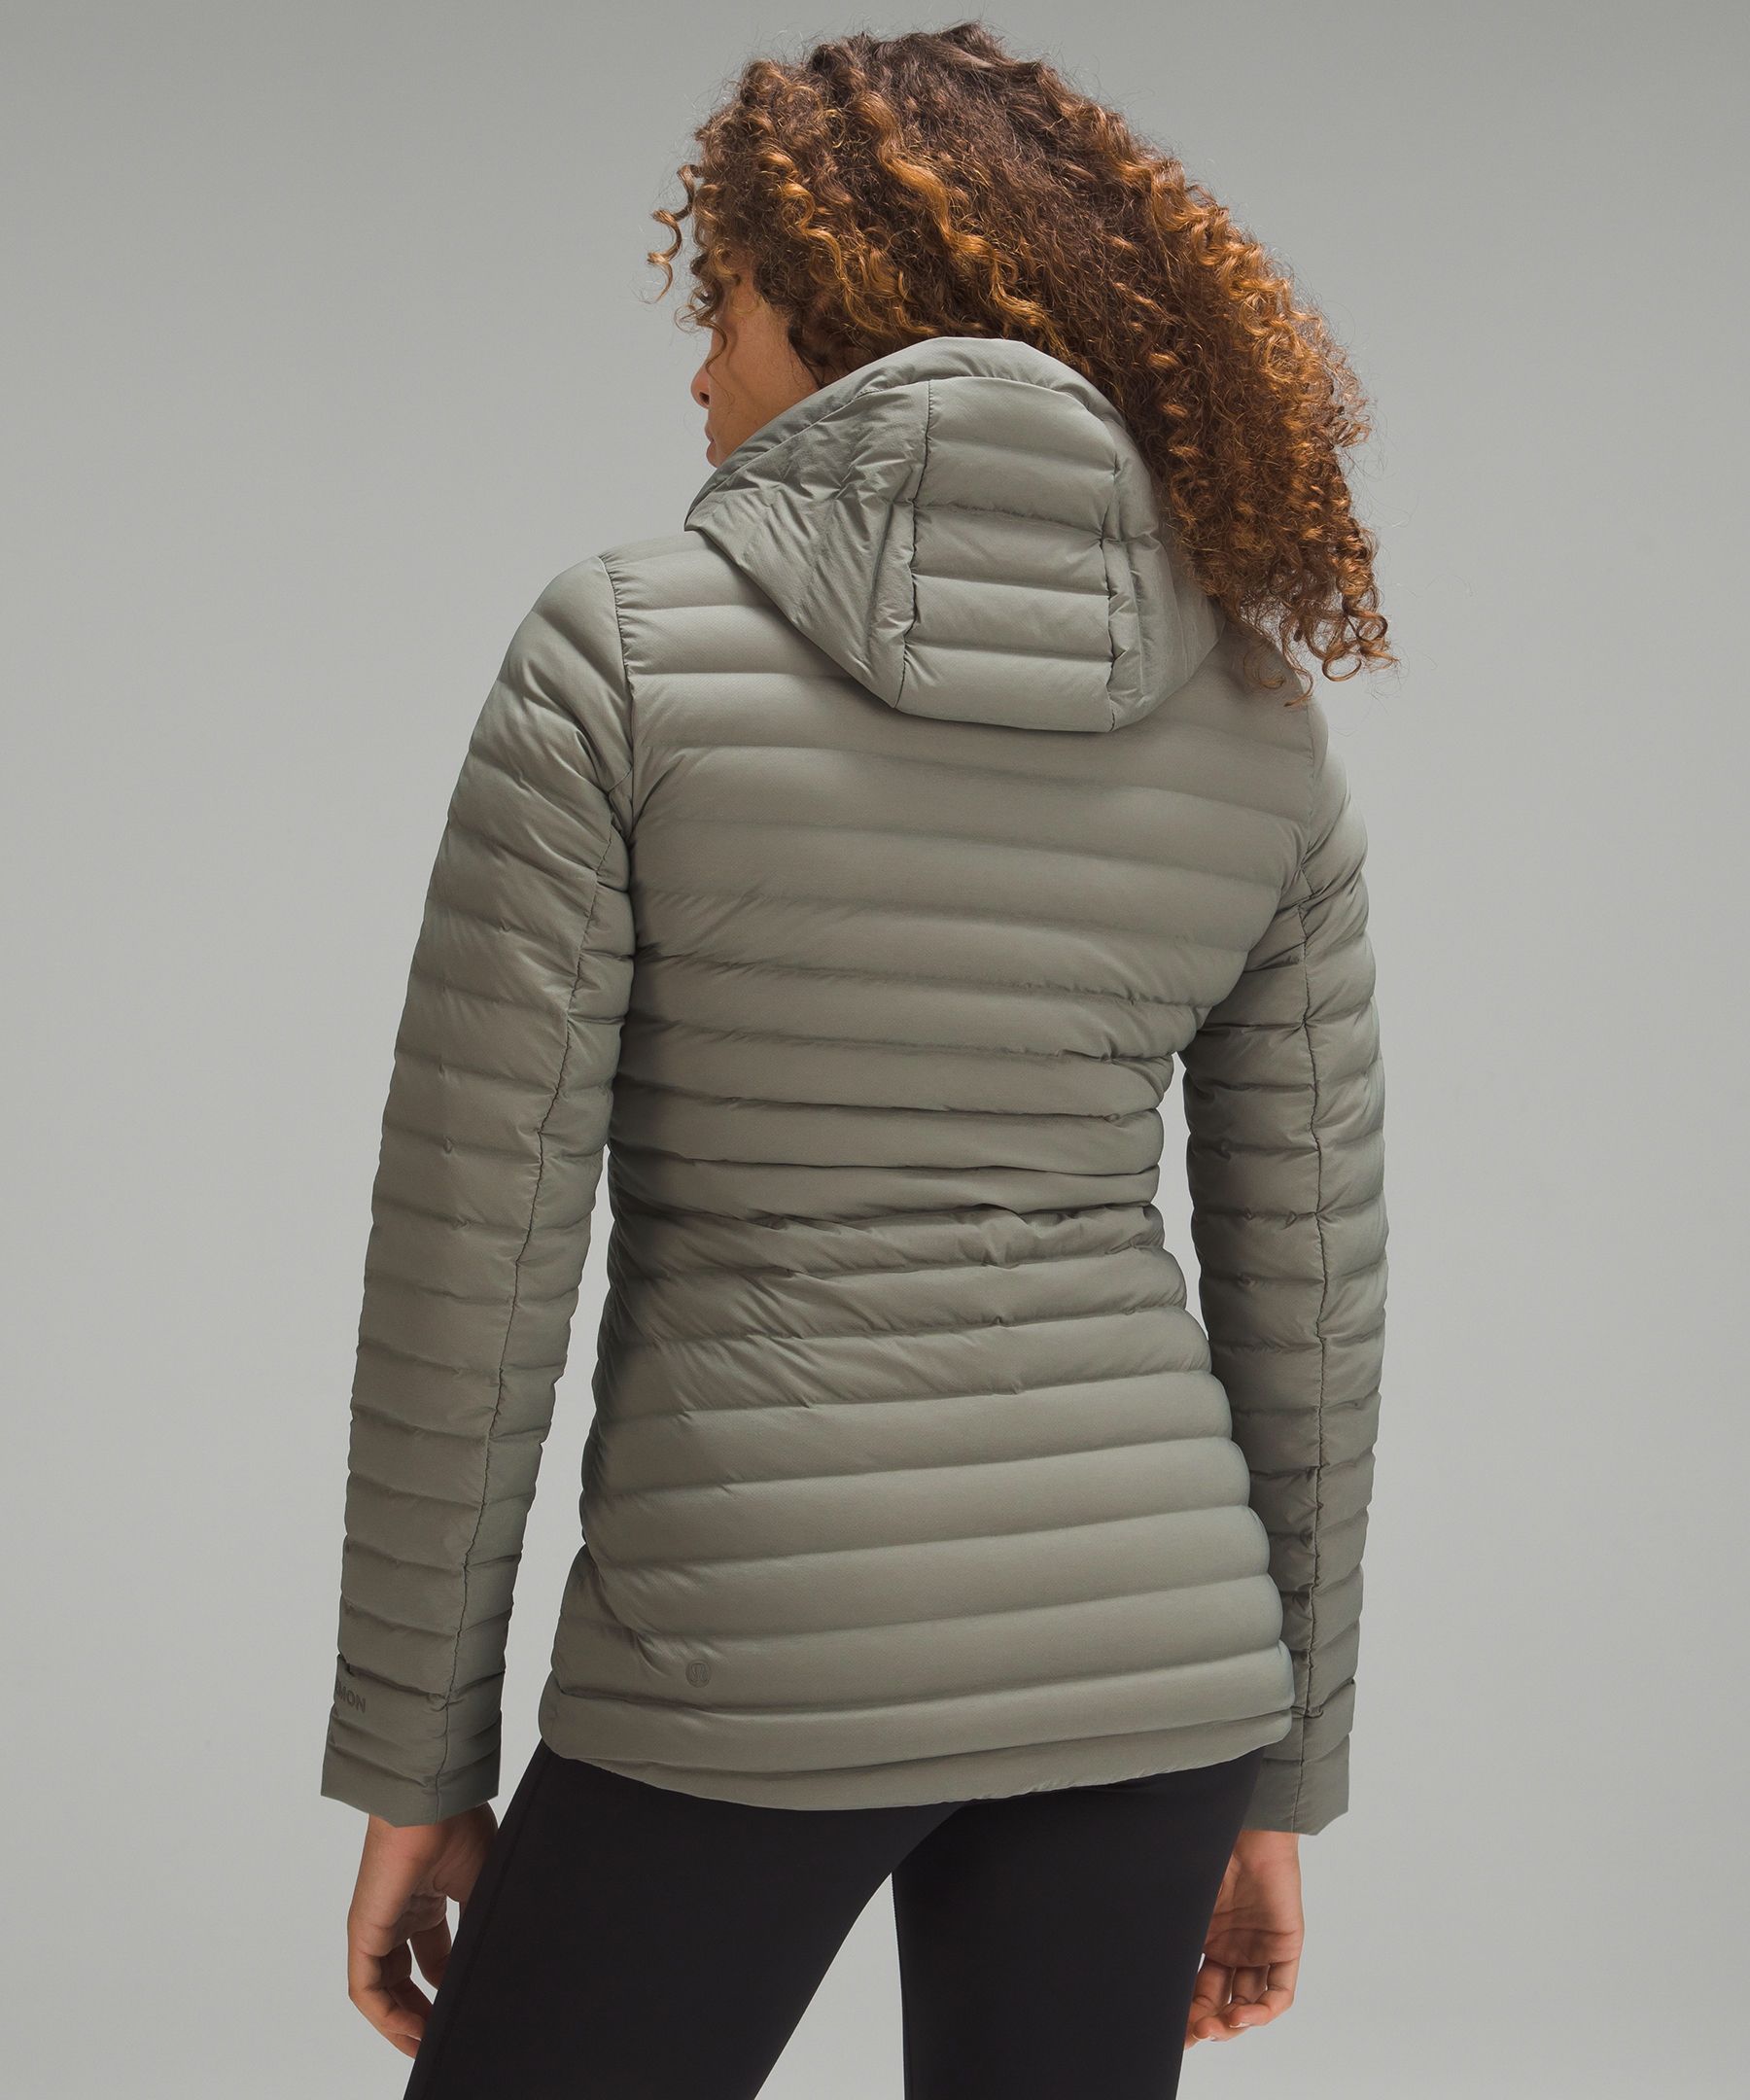 Grey Pack it Down quilted down gilet, lululemon